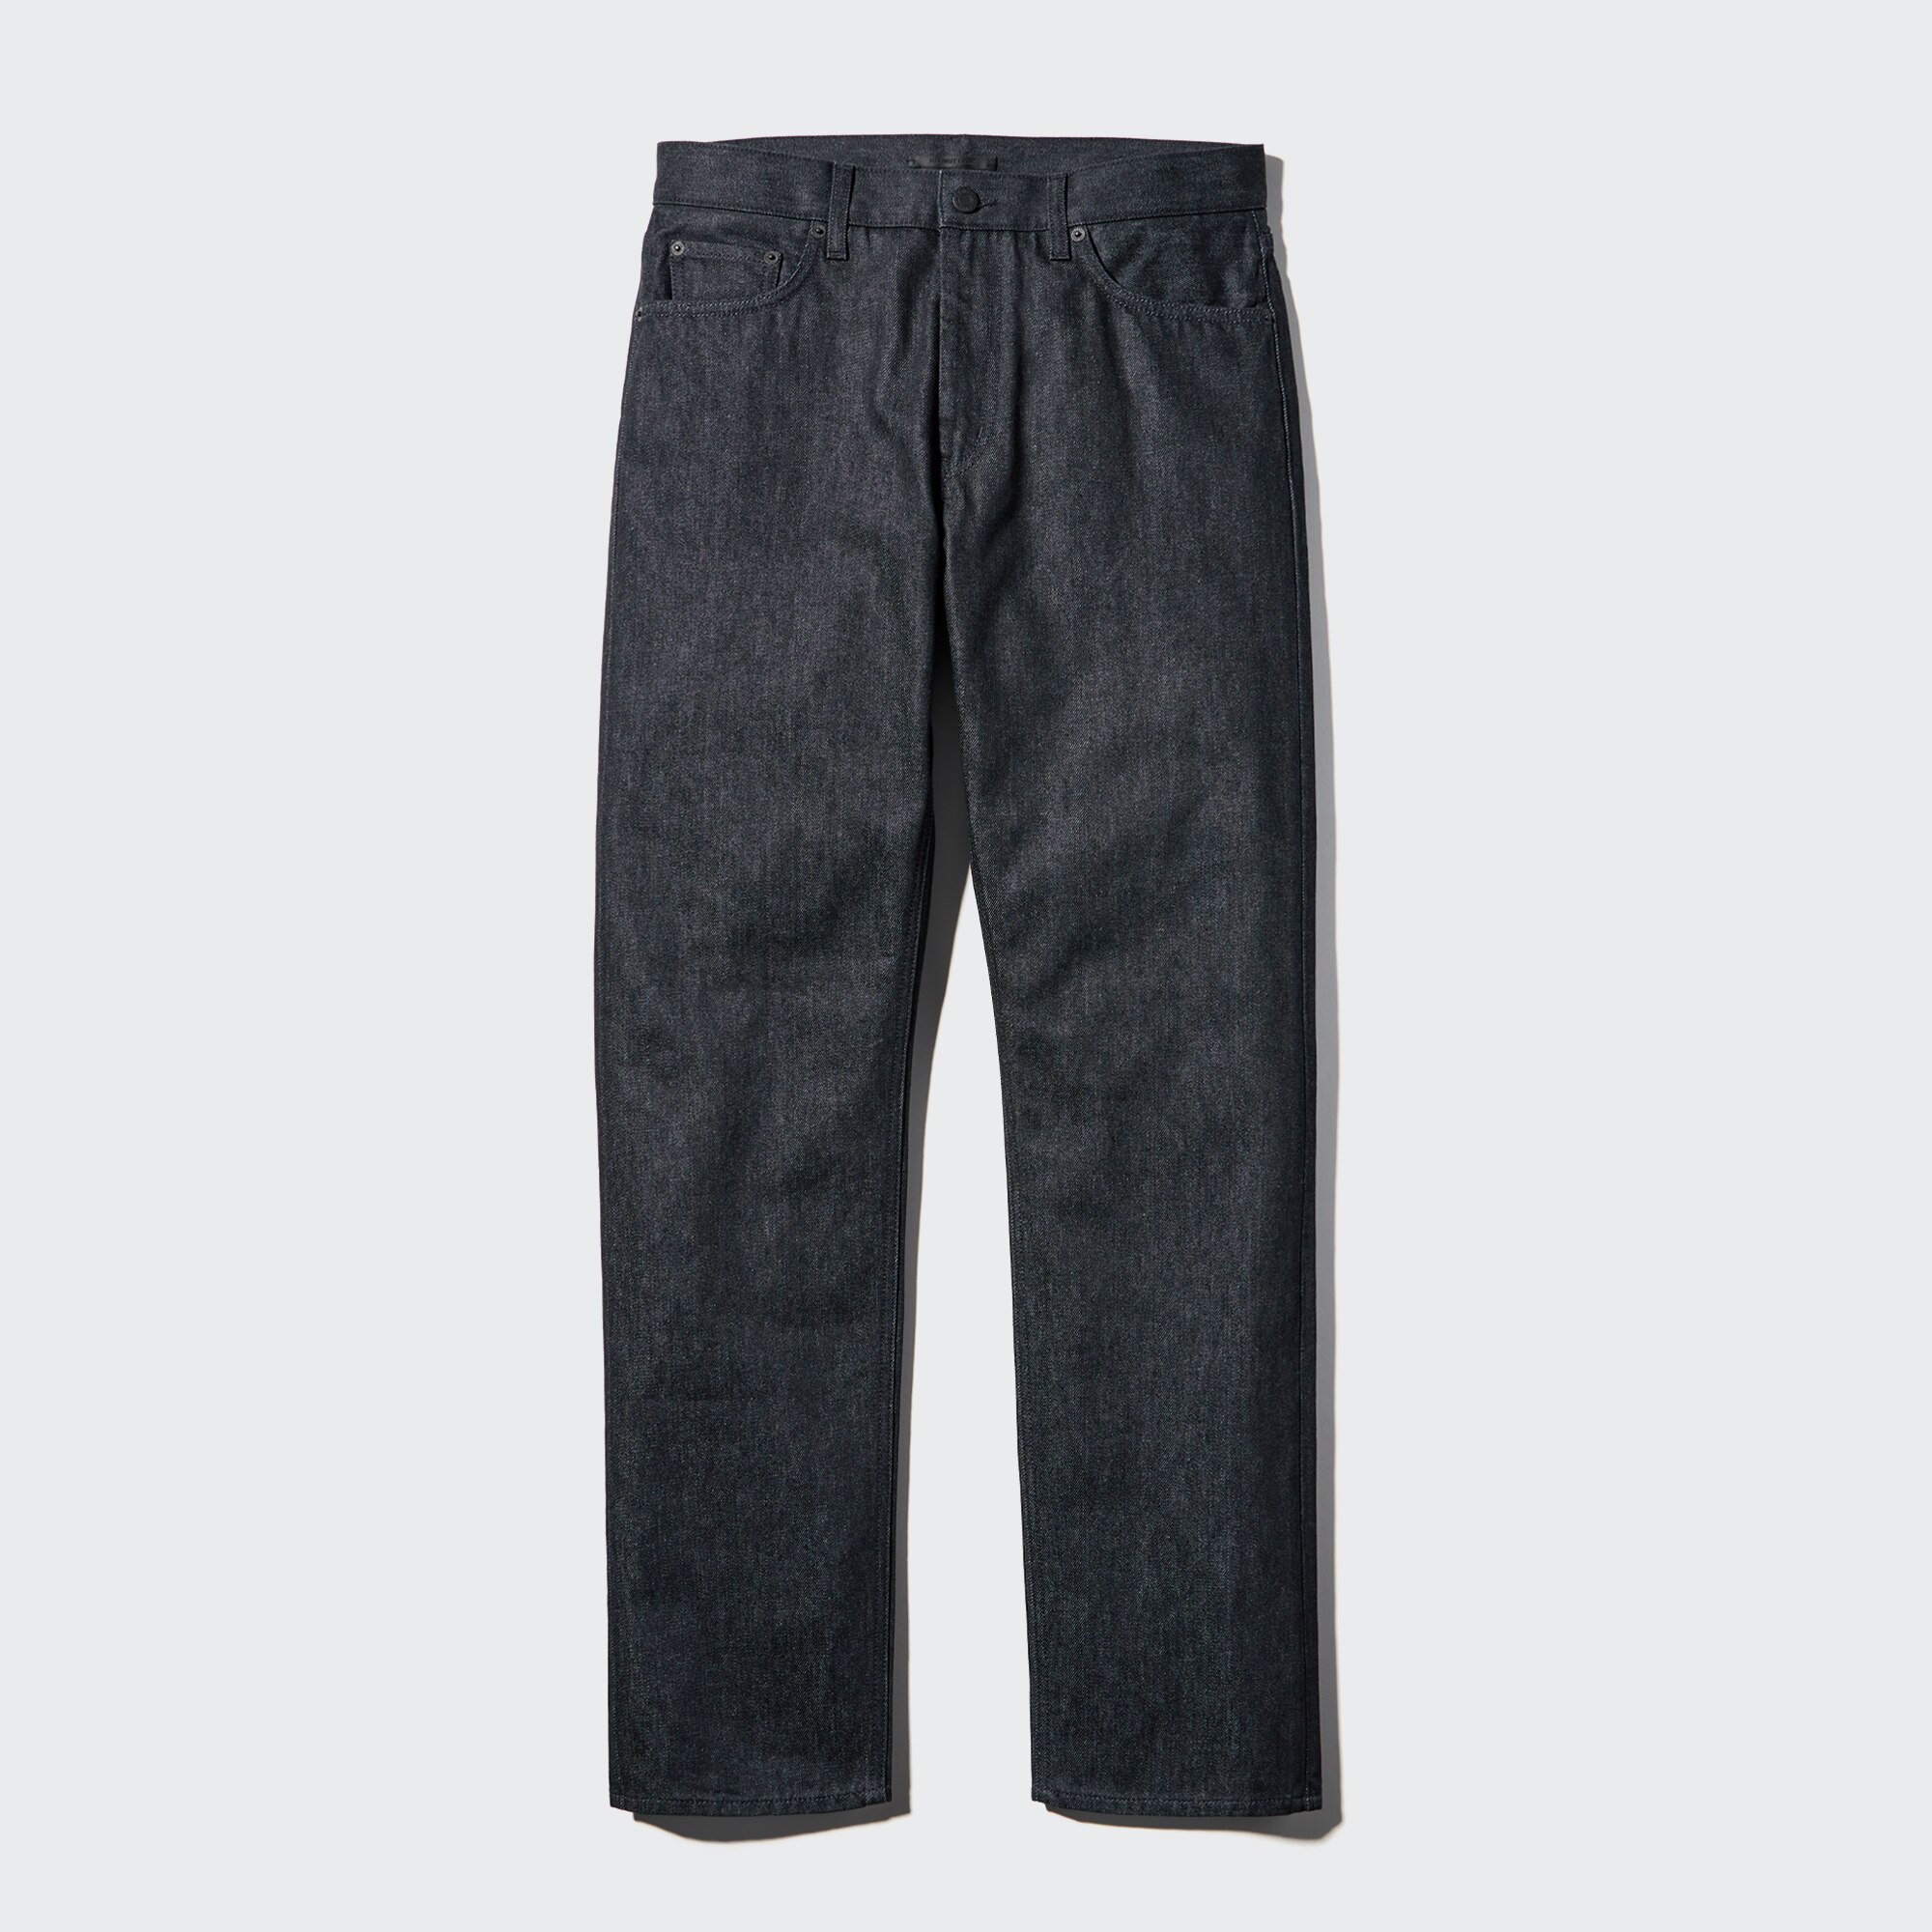 PLST(プラステ)公式 | UNIQLO and HELMUT LANG Classic Cut Jeans ...